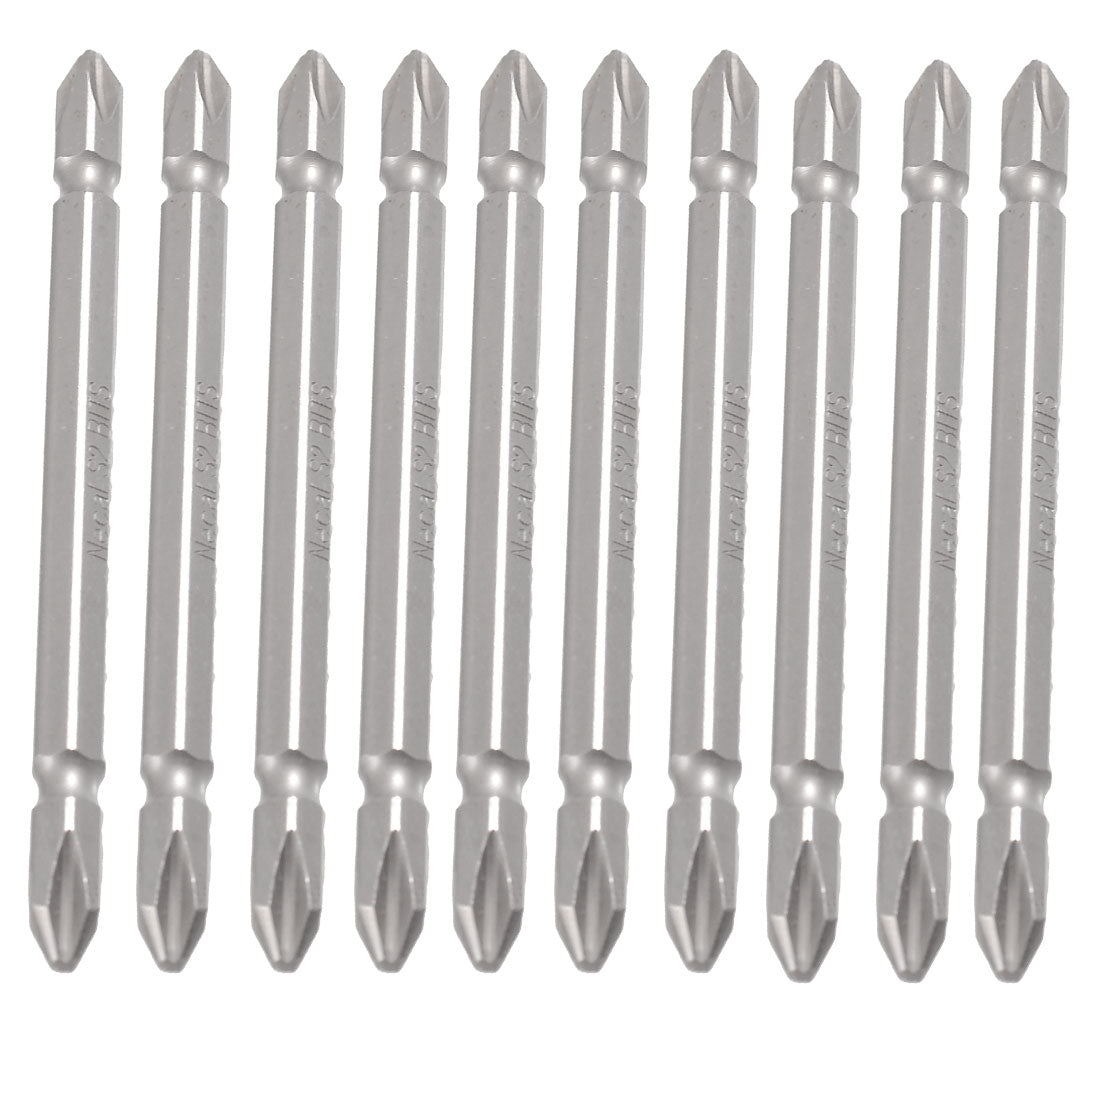 uxcell Uxcell 10 Pcs 1/4" Hex Shank 100mm Long 6mm Double End PH2 Phillips Screwdriver Bits